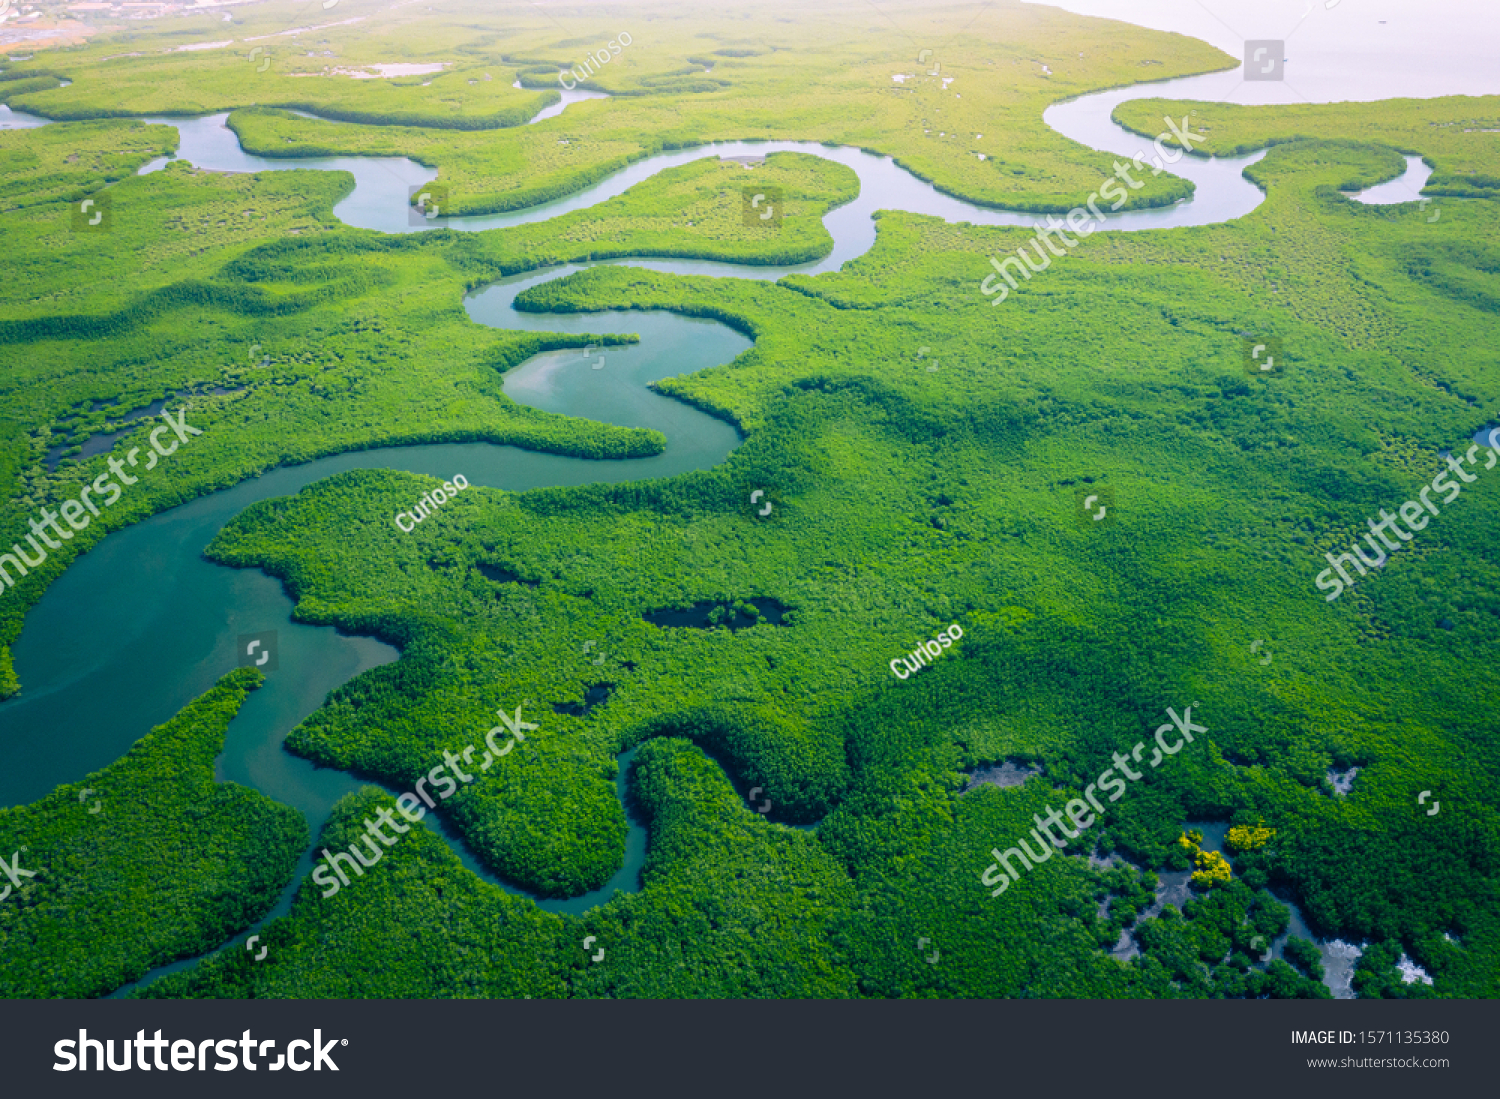 Gambia Mangroves. Aerial view of mangrove forest in Gambia. Photo made by drone from above. Africa Natural Landscape. #1571135380